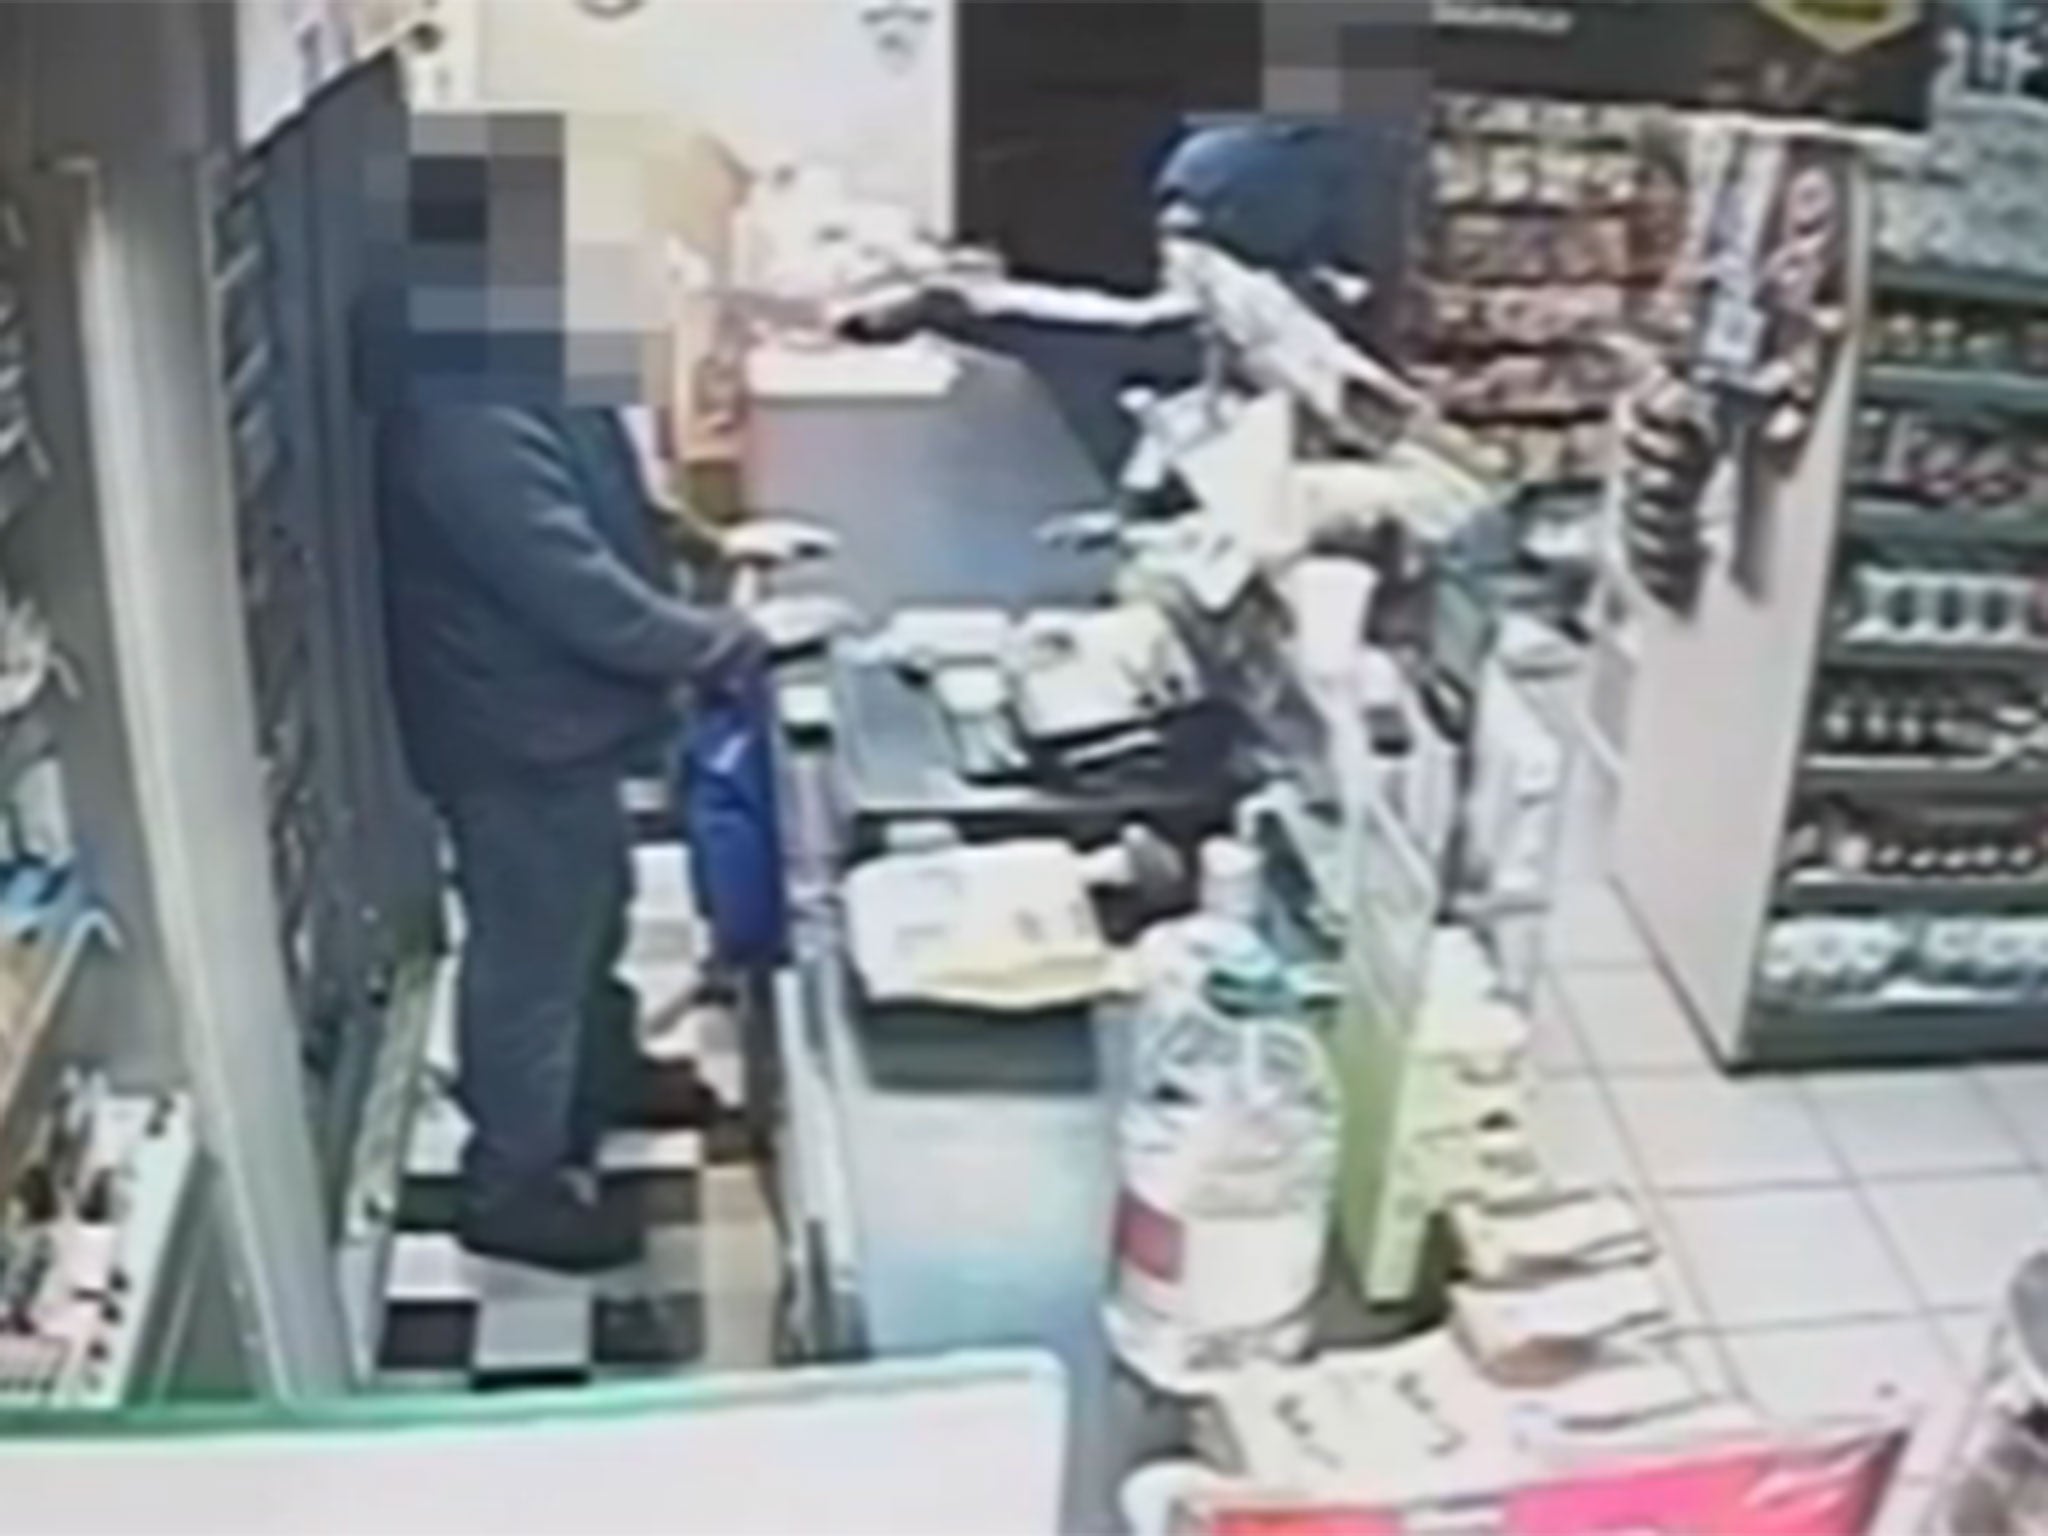 The shop worker was caught by the knife as he opened the till